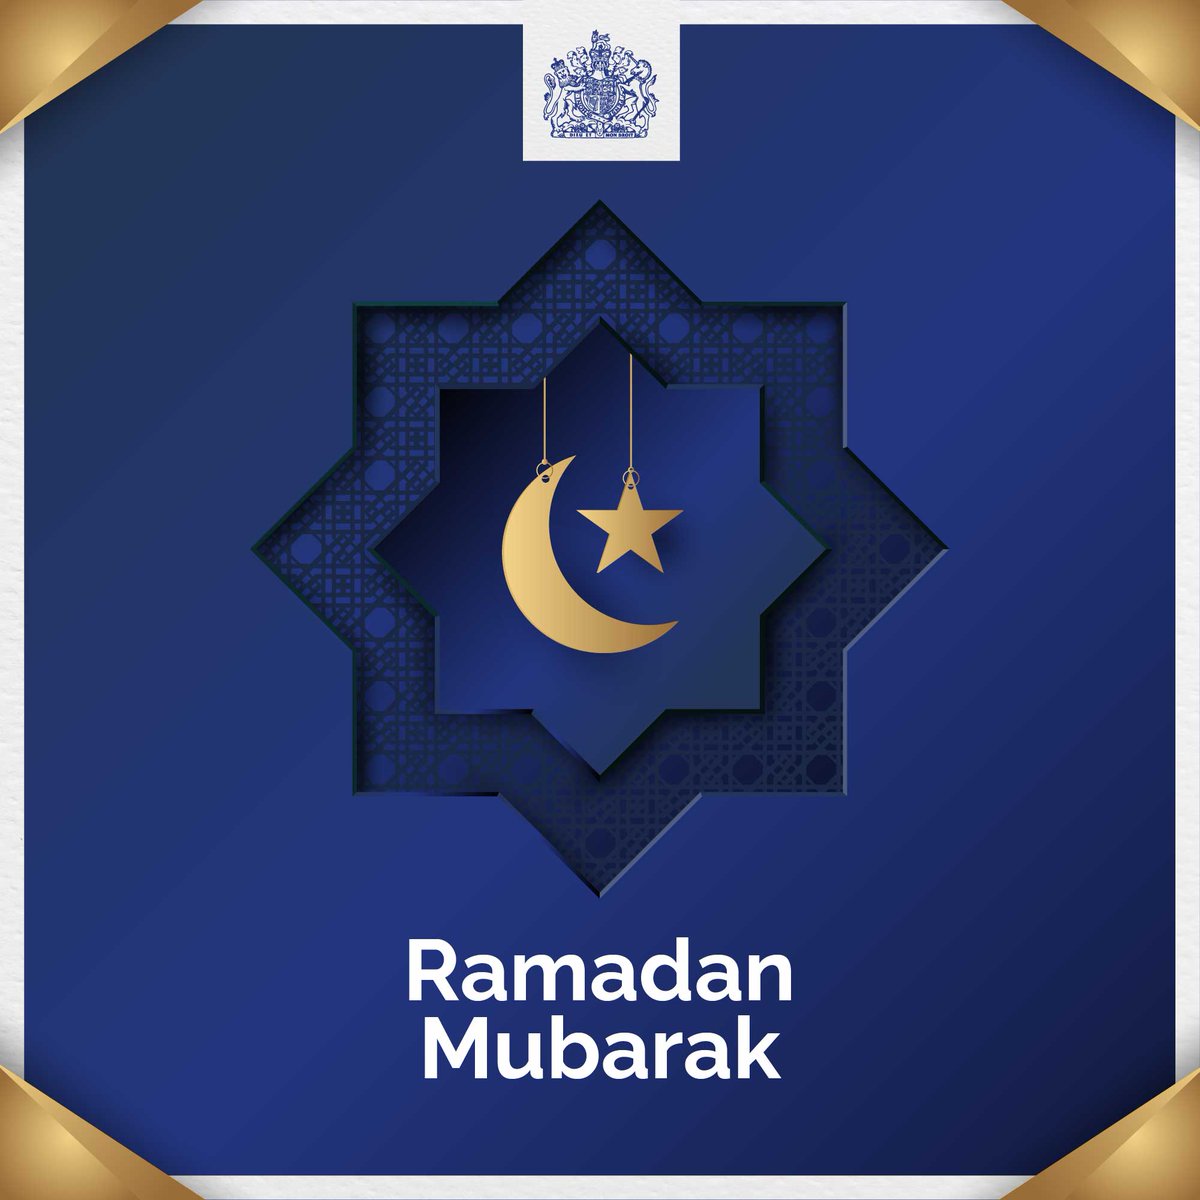 Wishing all Muslims in the UK, the Commonwealth and around the world a blessed and peaceful Ramadan. #RamadanMubarak